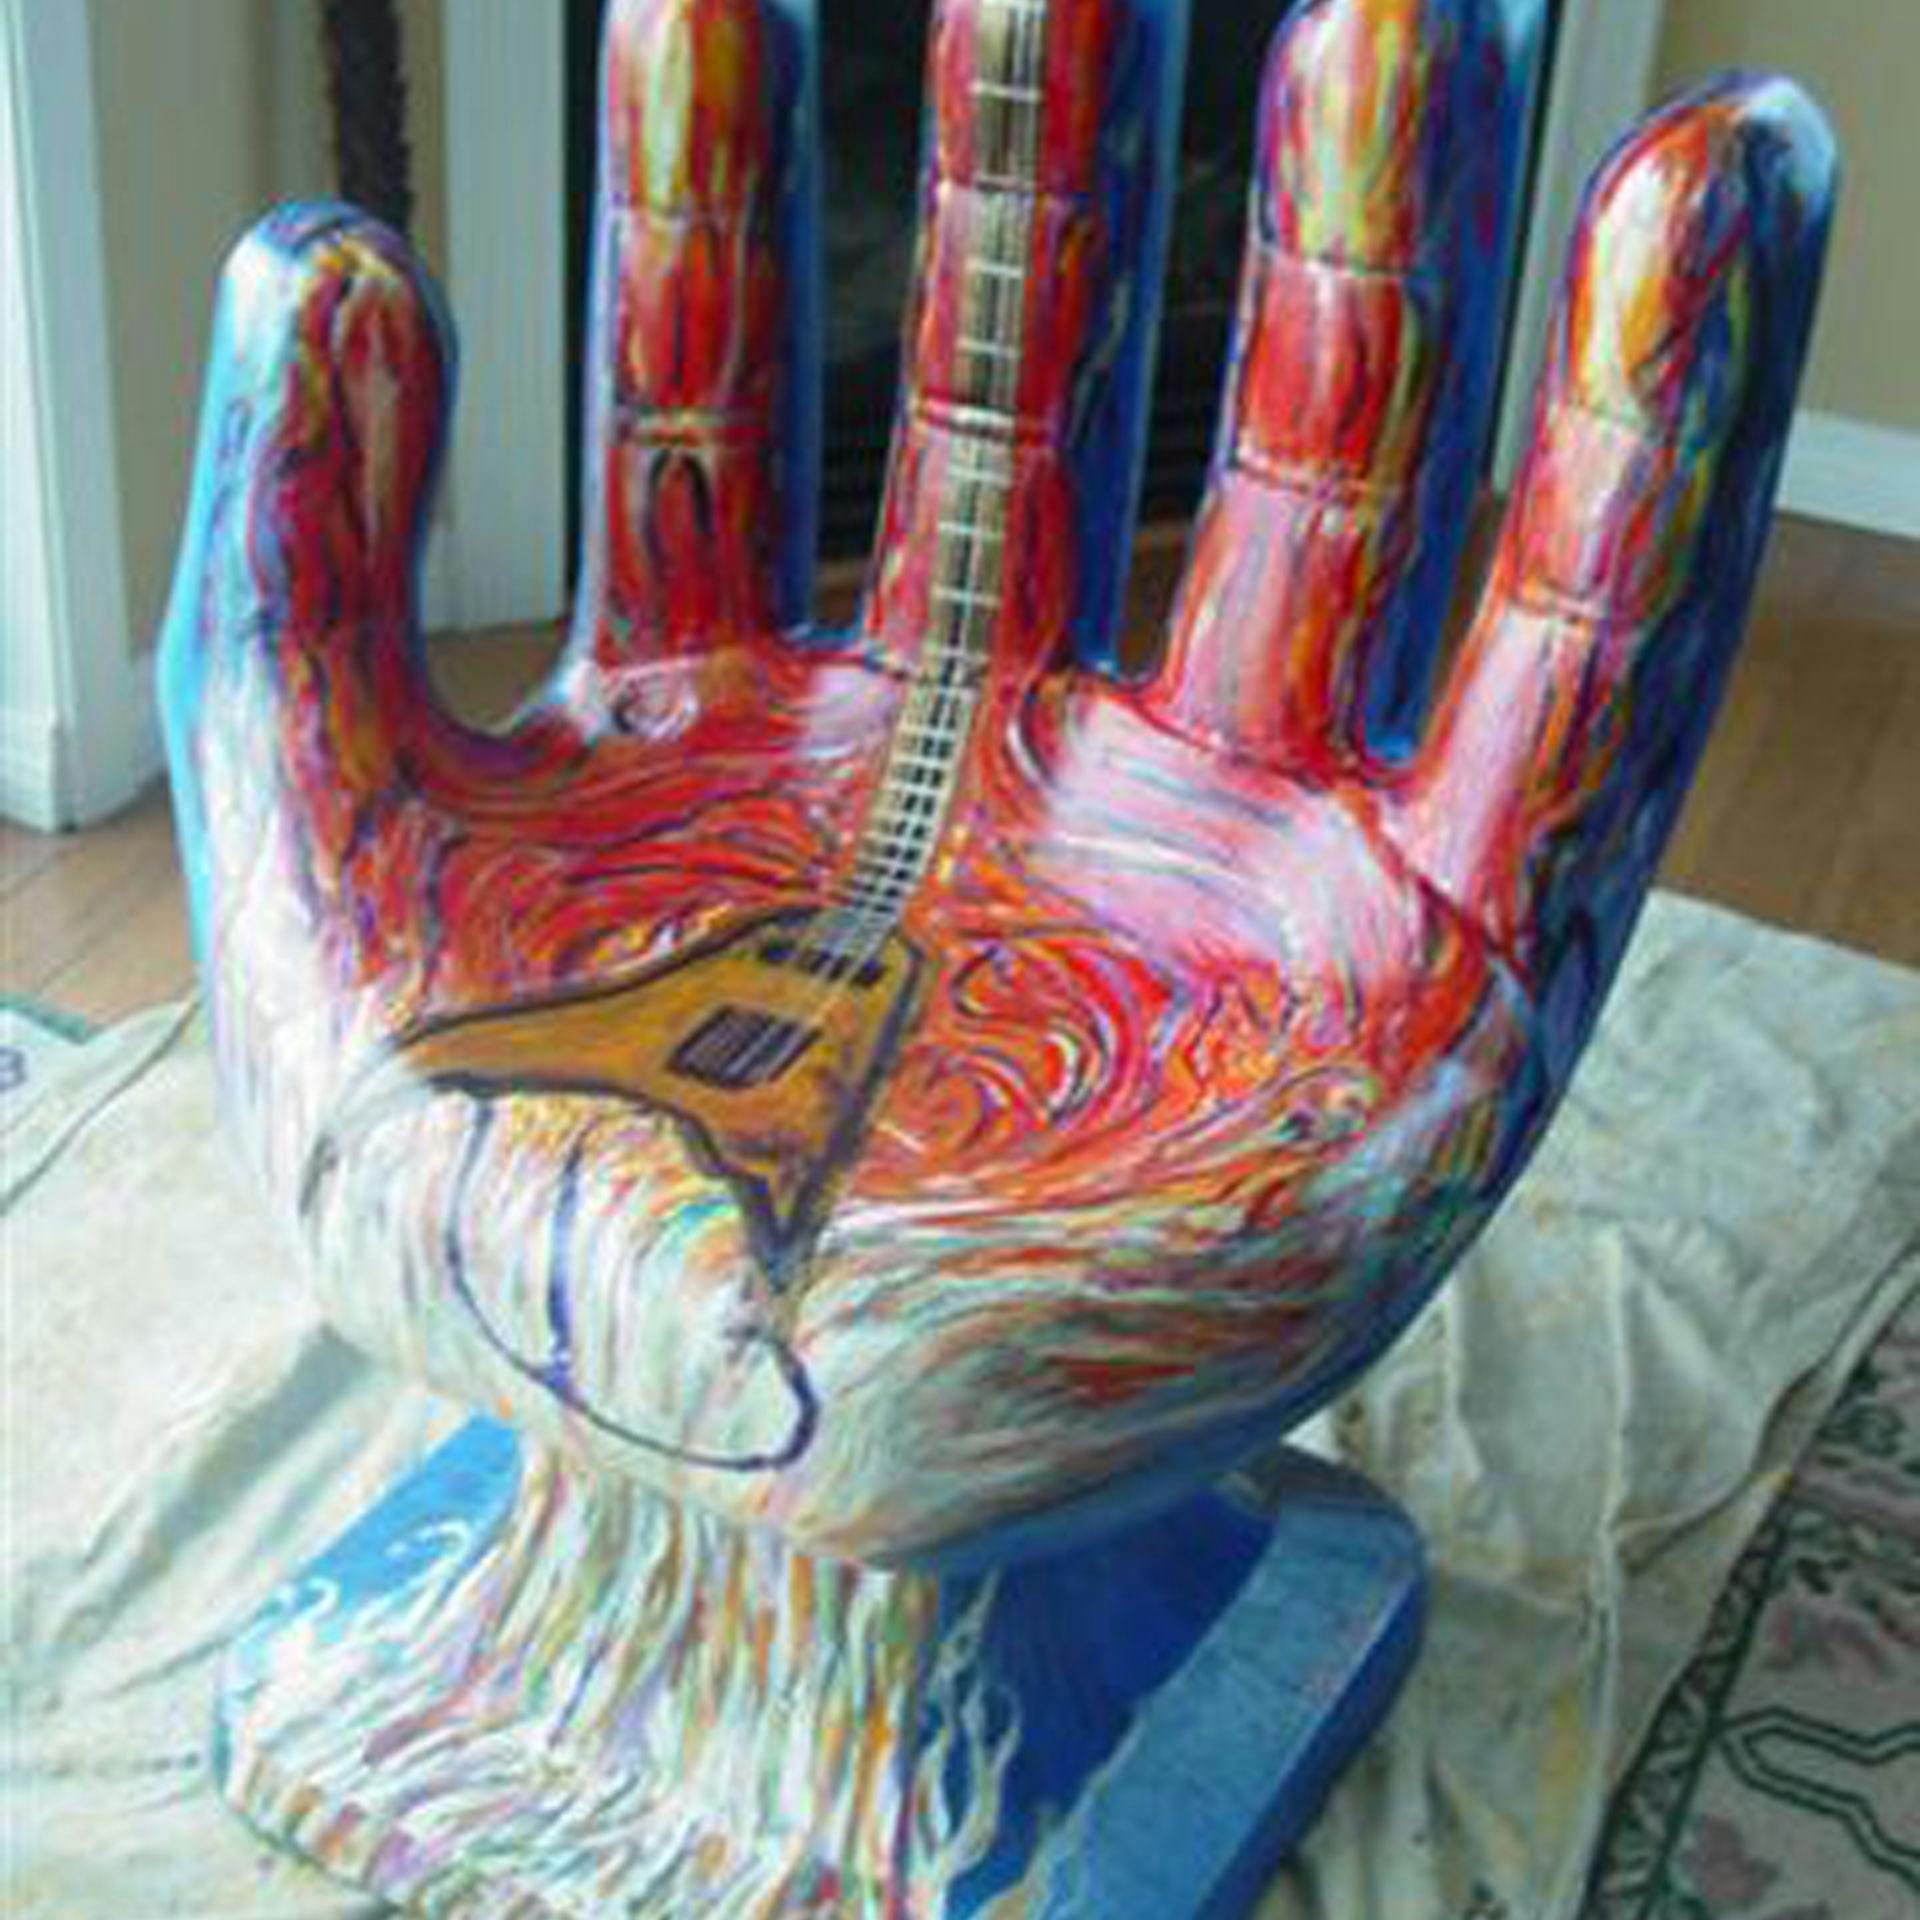 Free stock photo of Artist Peter Daniels., Hand sculpture with guitar.